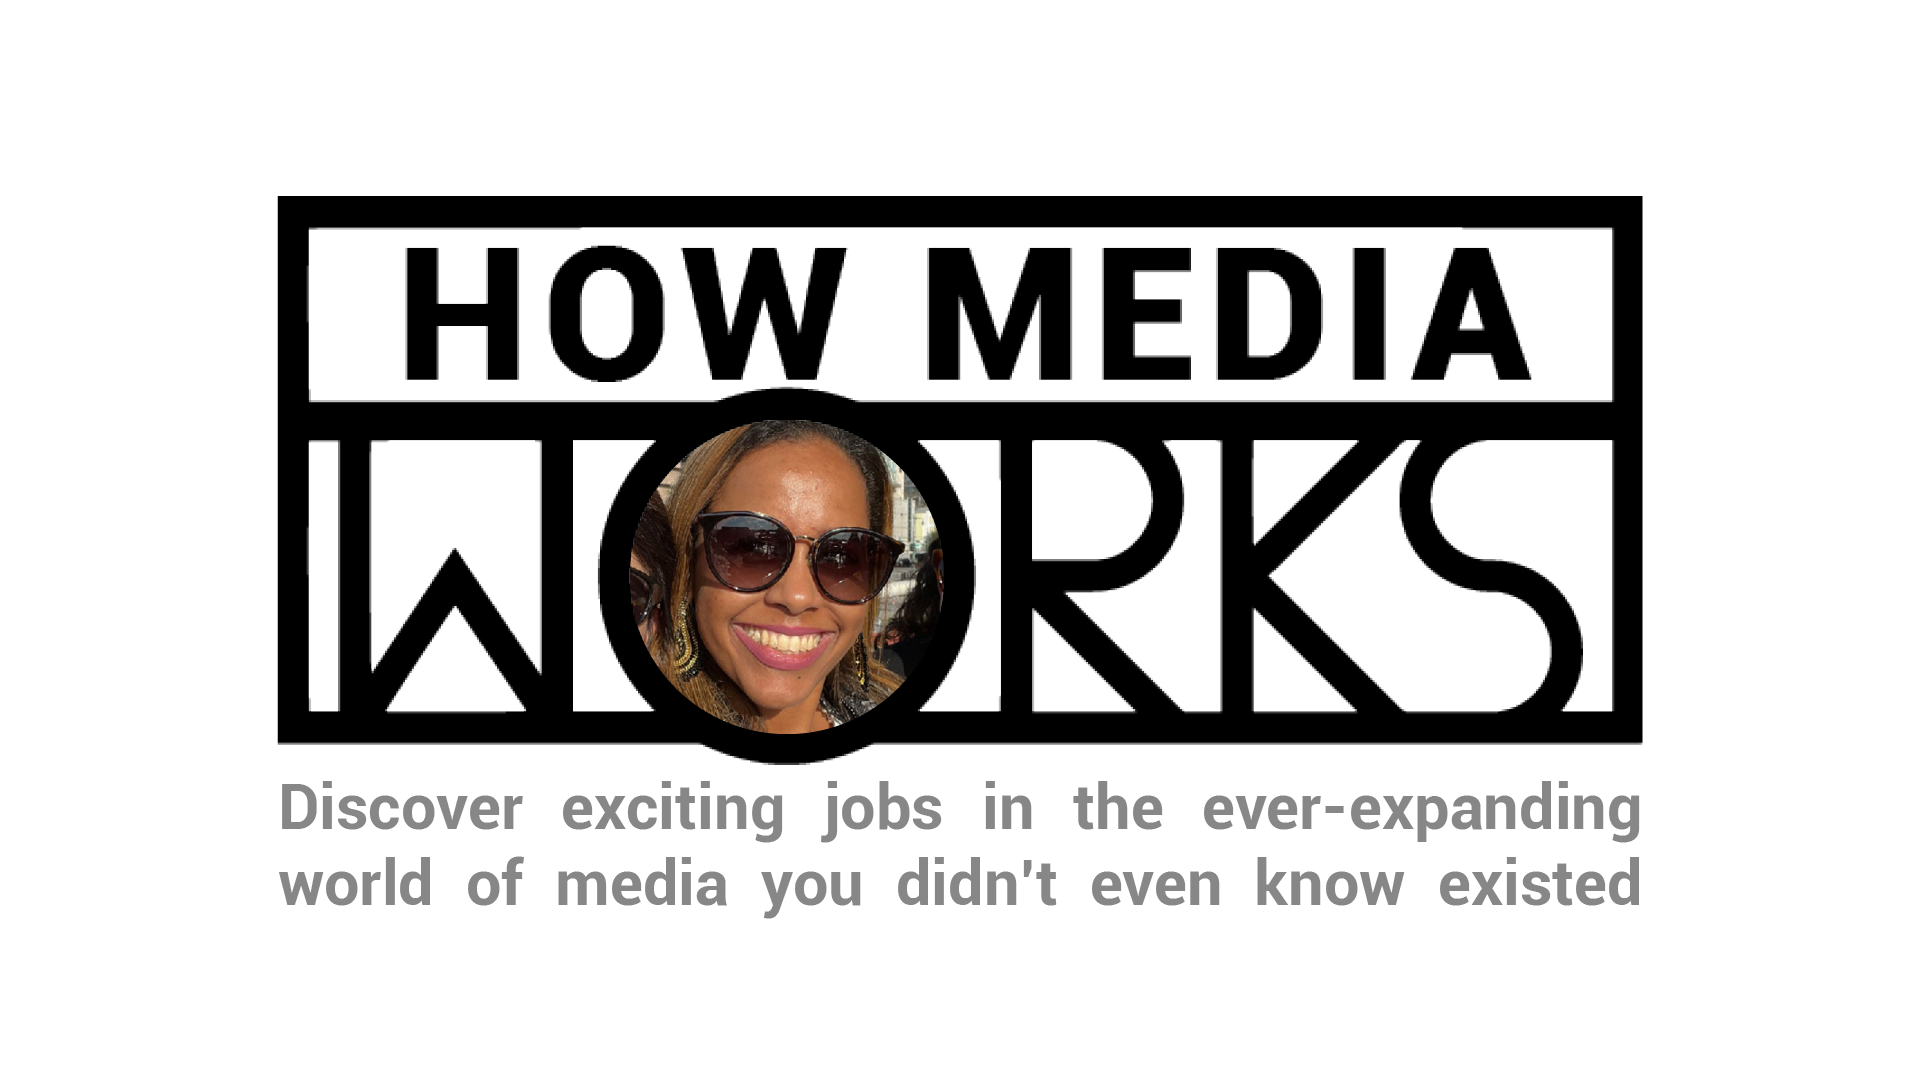 Graphic with a picture of a smiling woman and words that say "How Media Works"